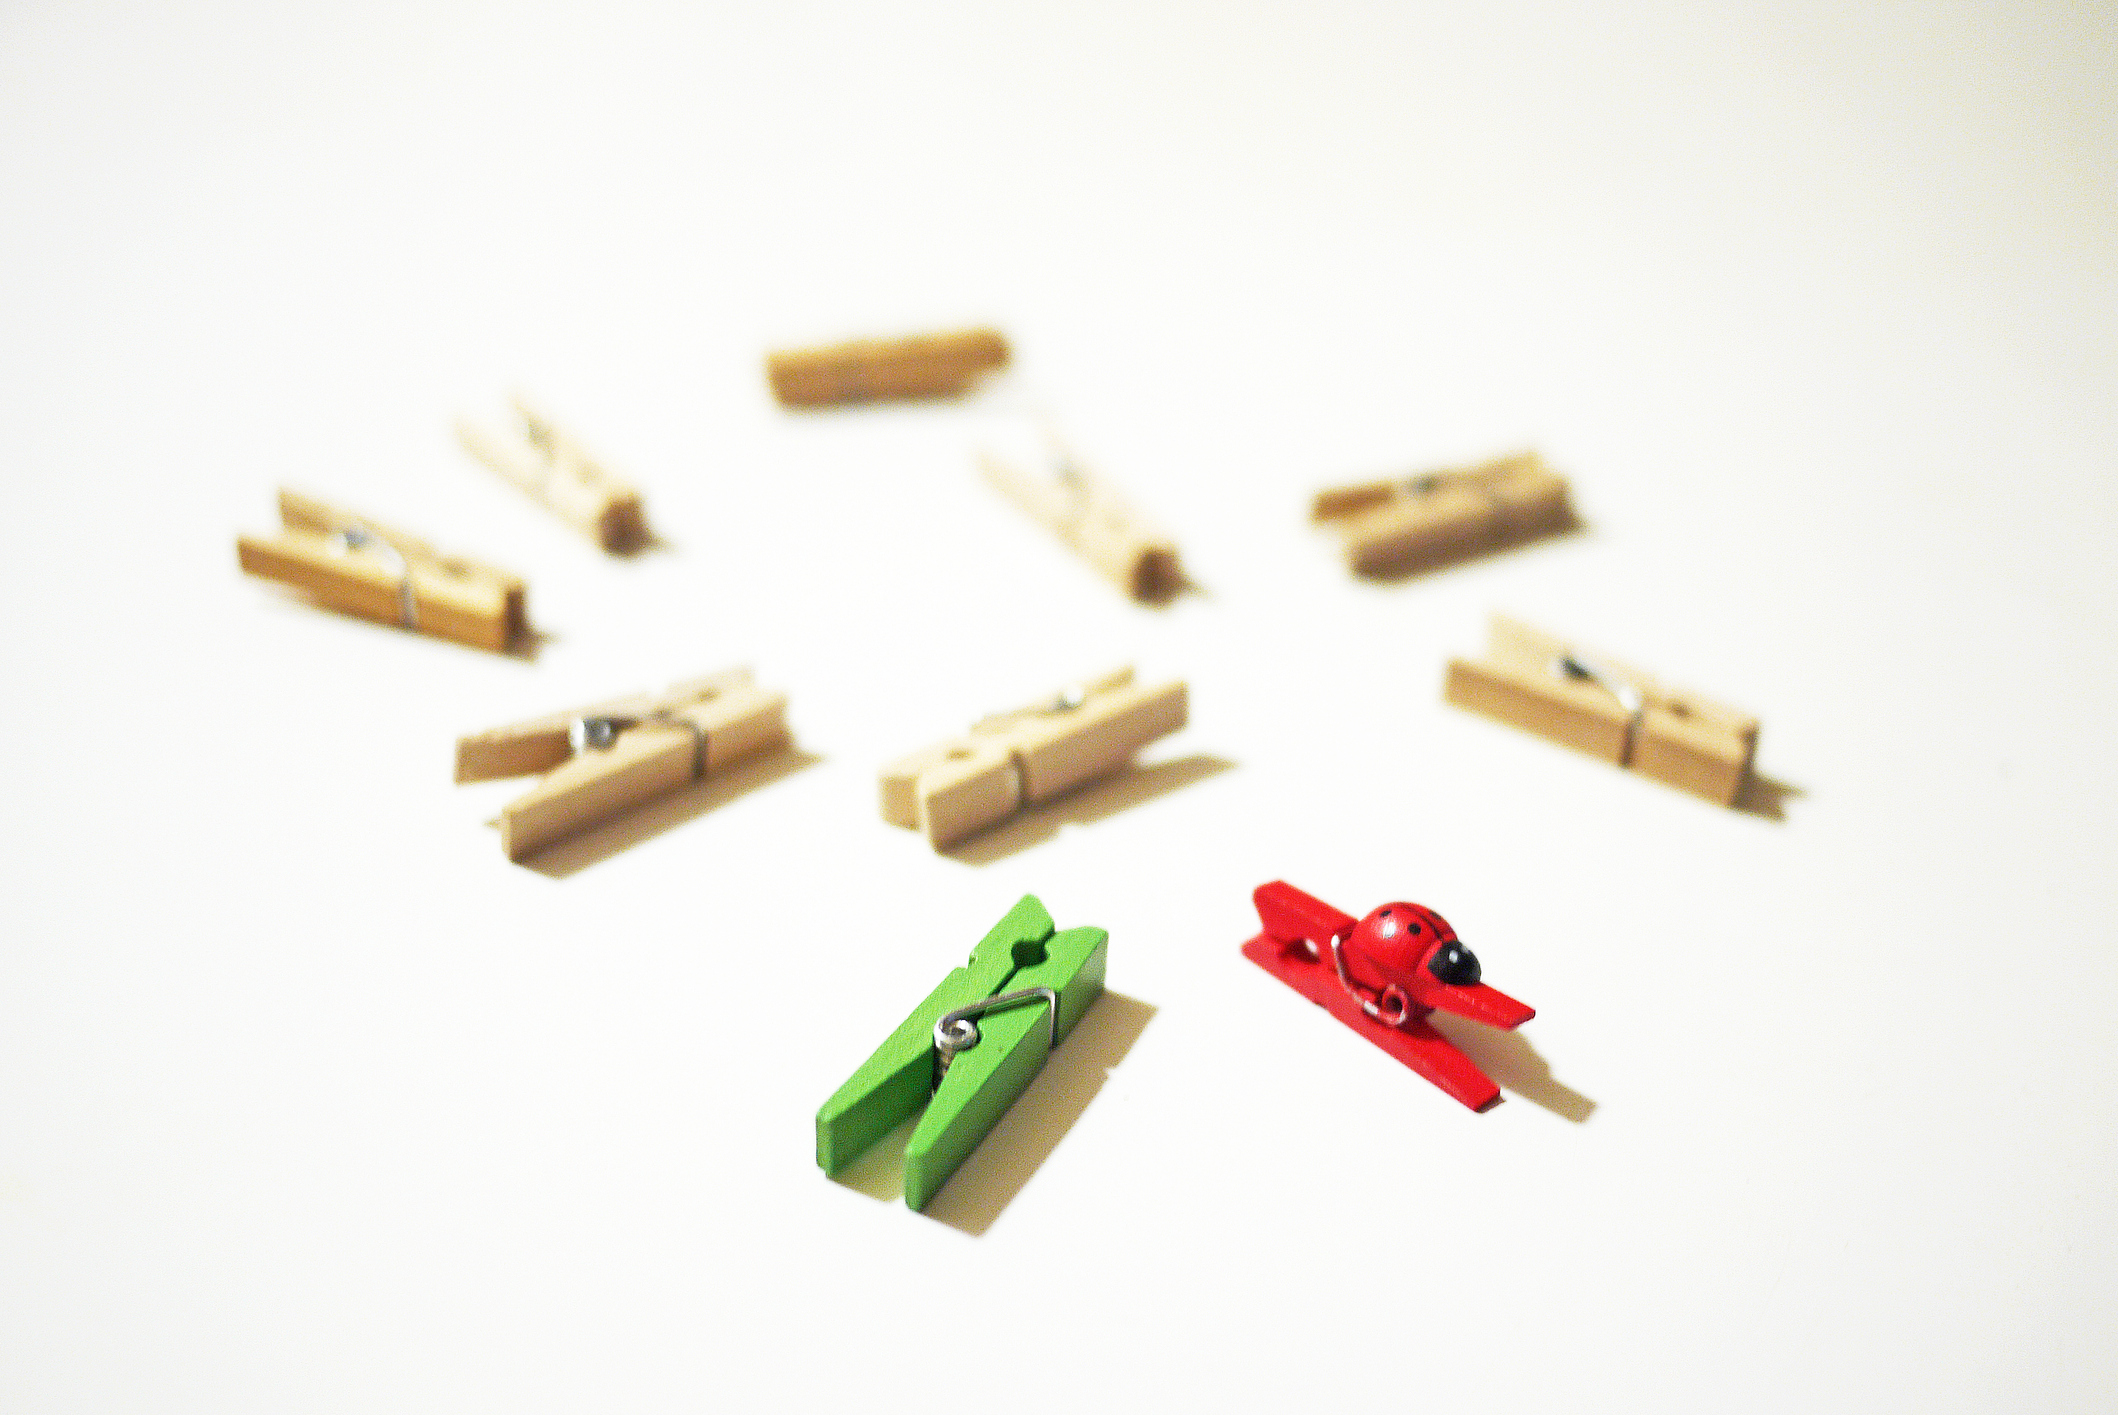 Scattered clothespins with red and green that slide forward